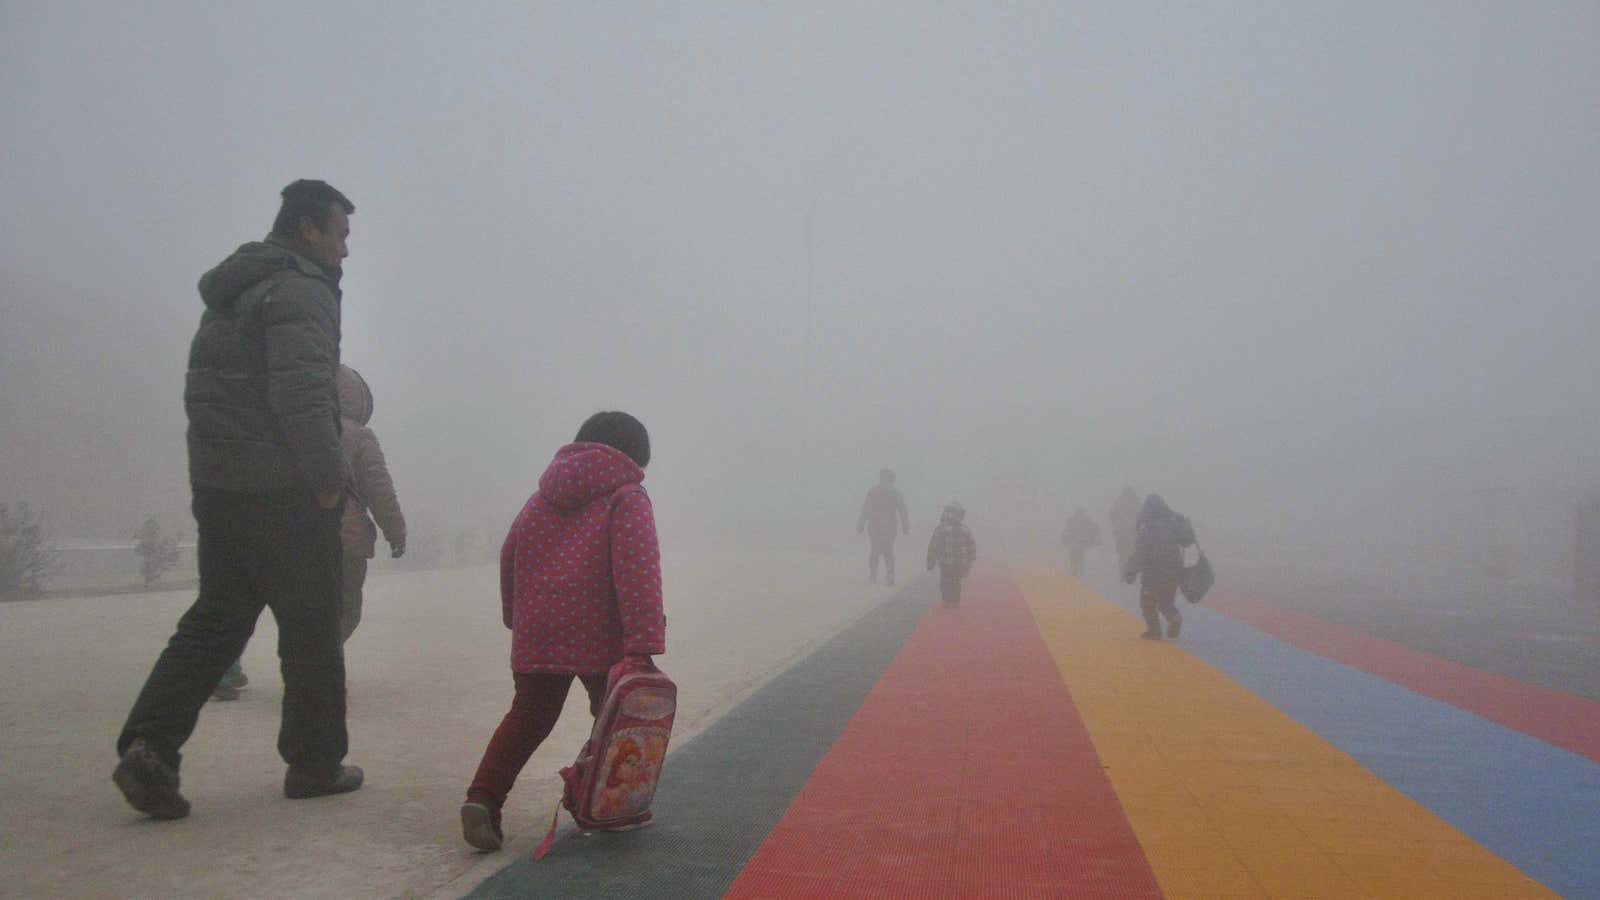 A documentary looks through the haze of China’s pollution